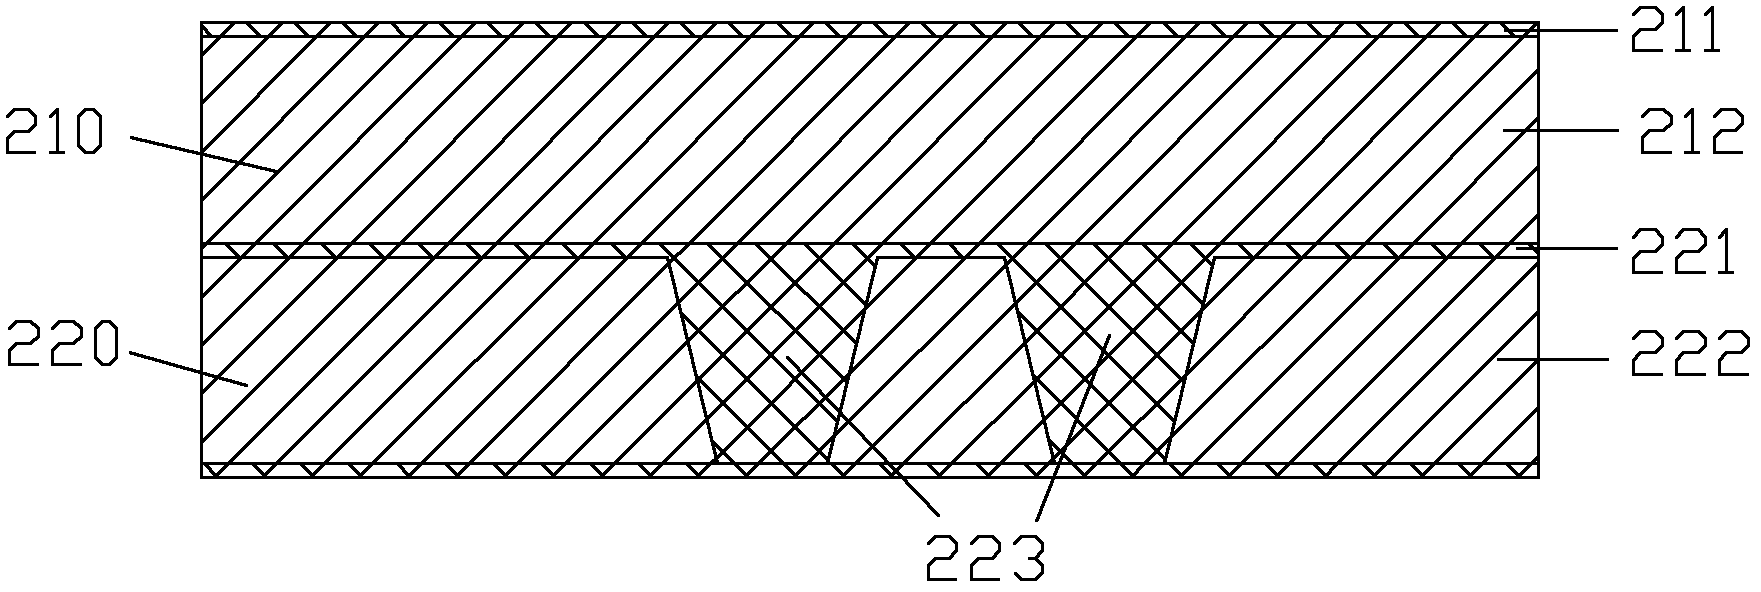 Method for making copper cylinder on circuit board and circuit board with surface copper cylinders